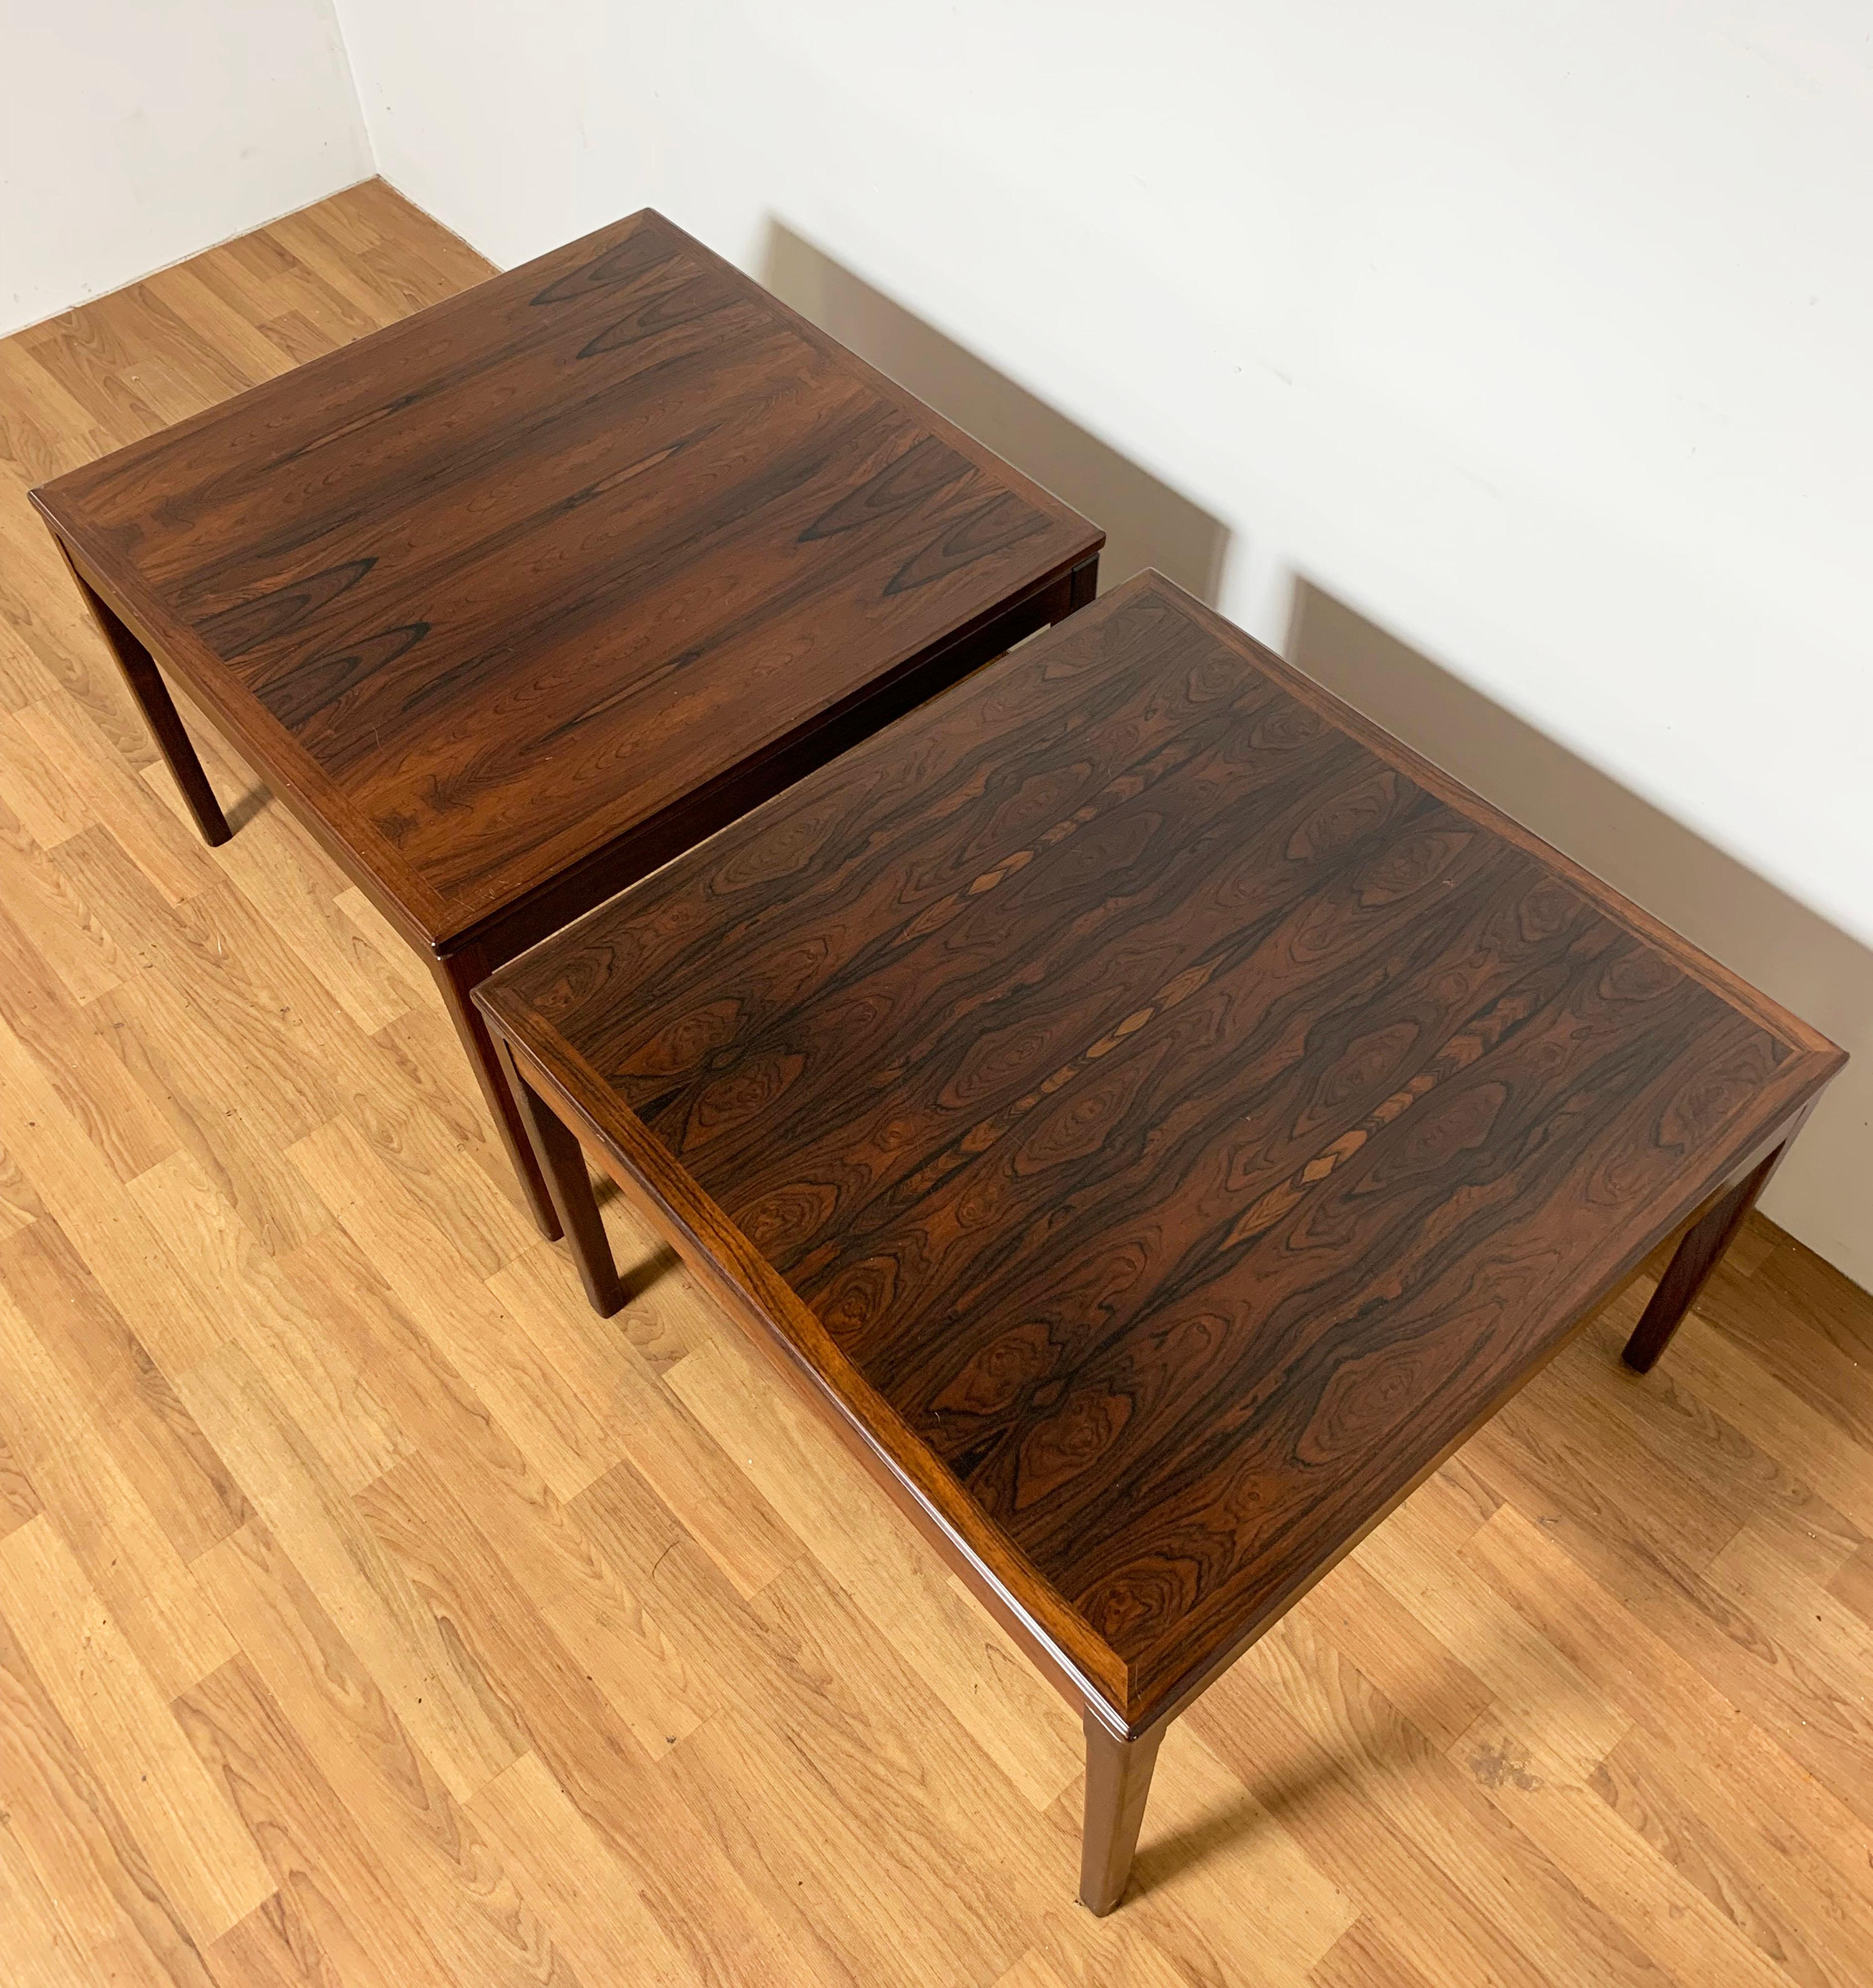 Pair of Rosewood Side Tables, Made in Norway, Circa 1970s For Sale 2